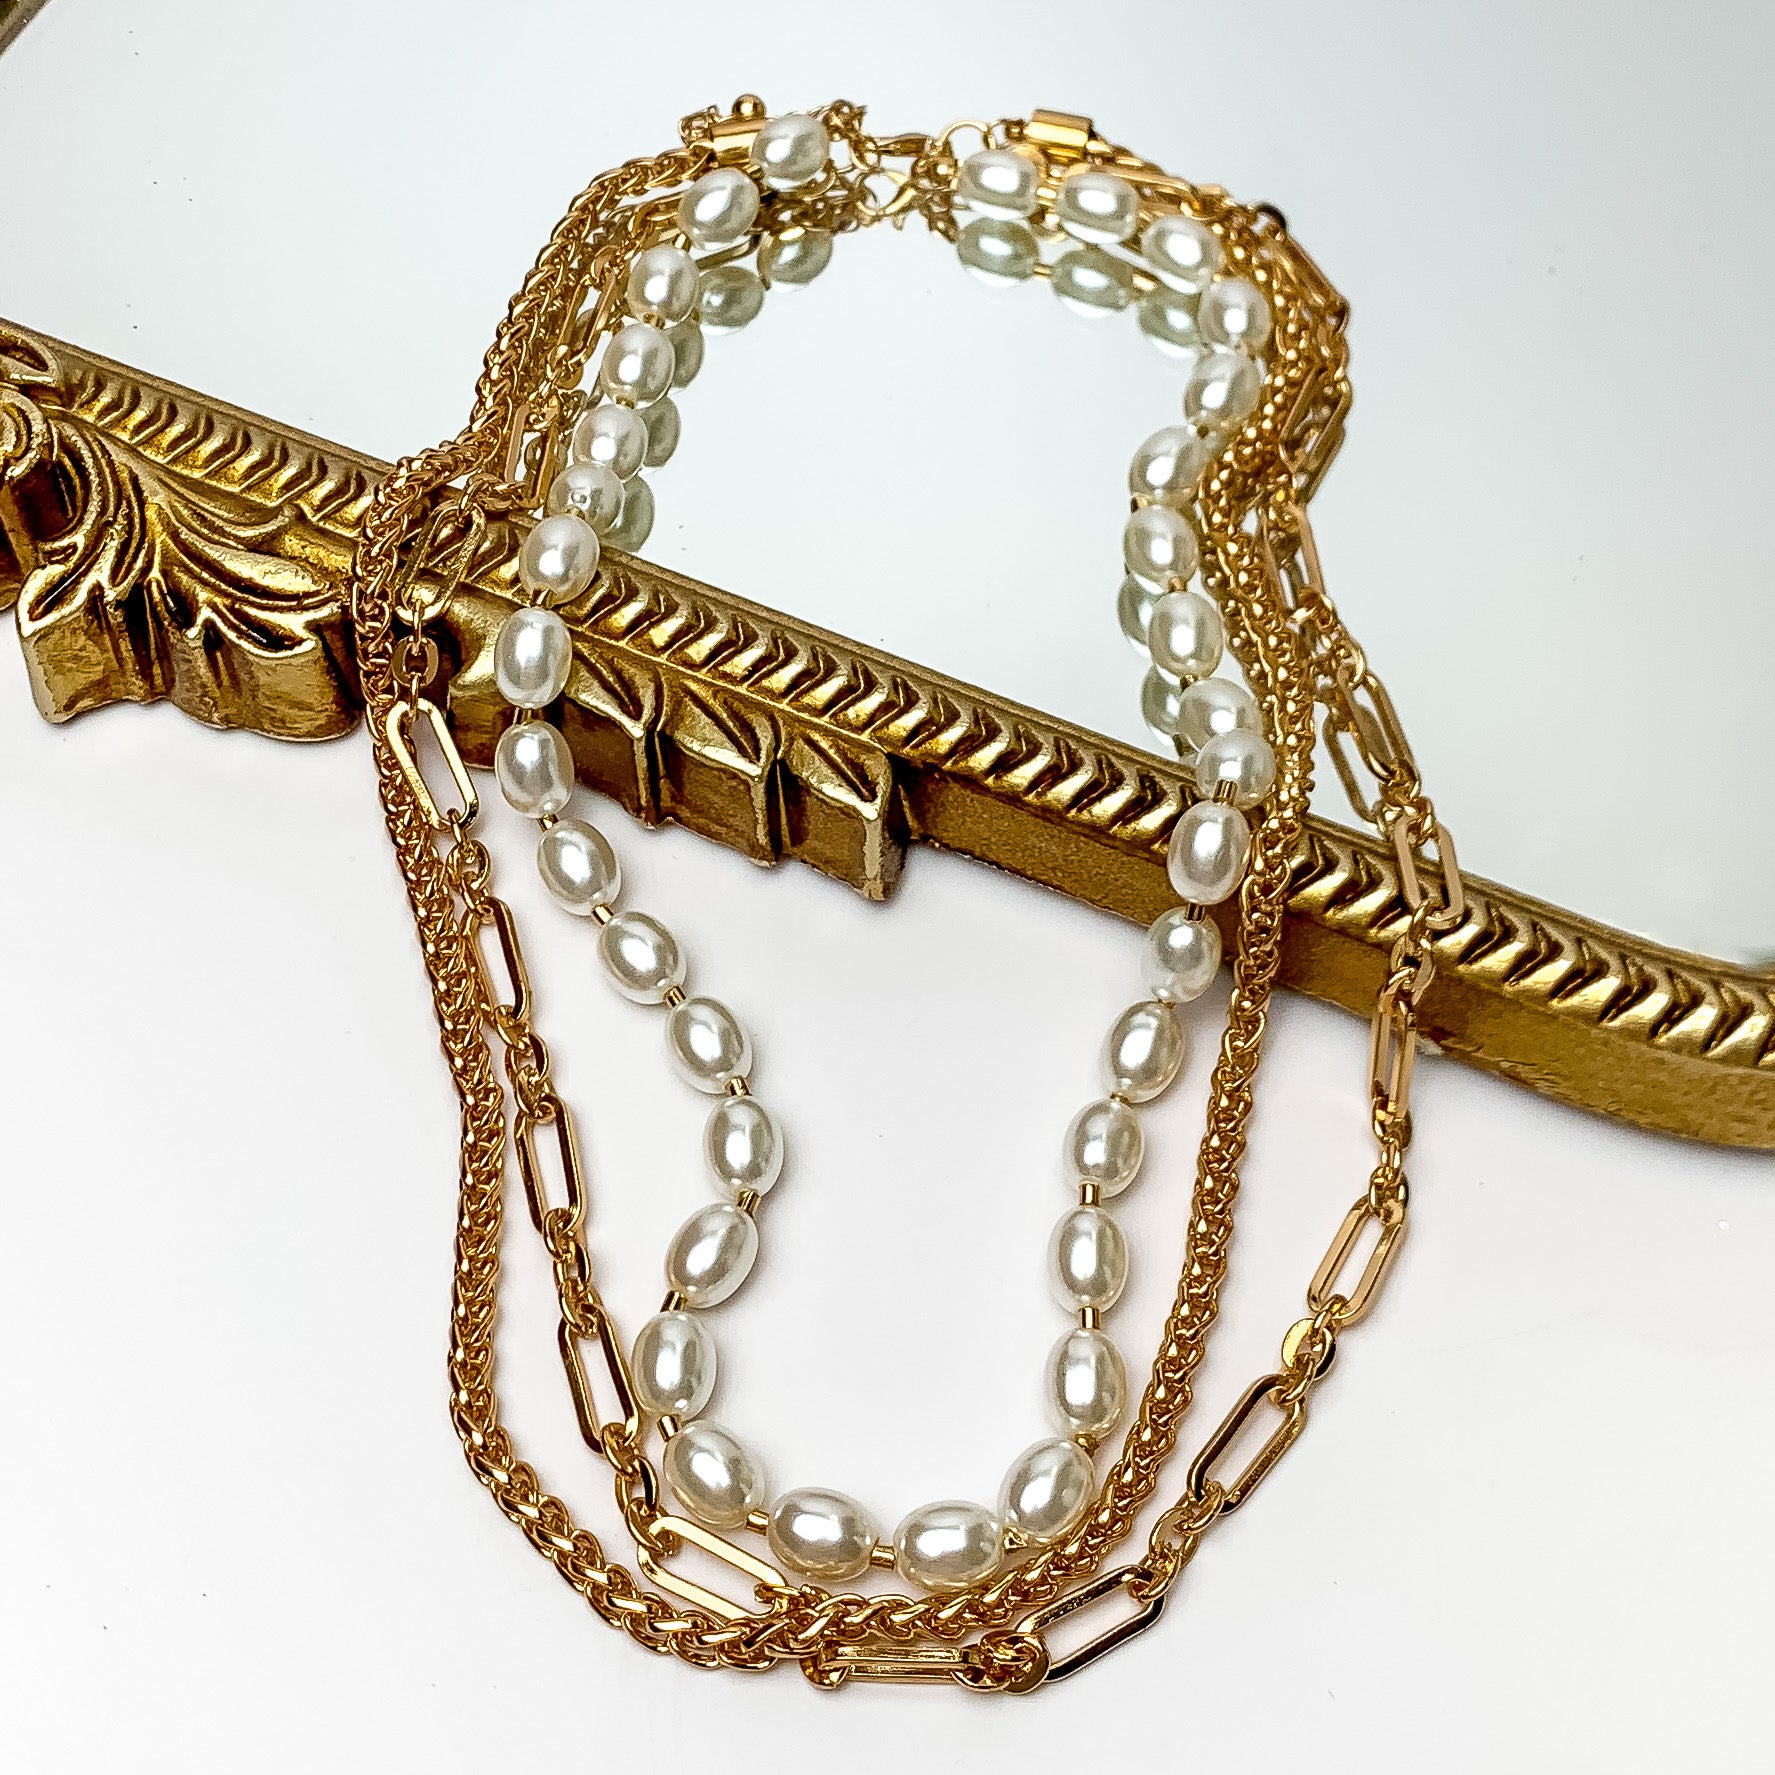 Princess Pearl Three Strand Necklace in Gold Tone. Pictured on a white background with part of the necklace laying on a mirror with a gold trim.